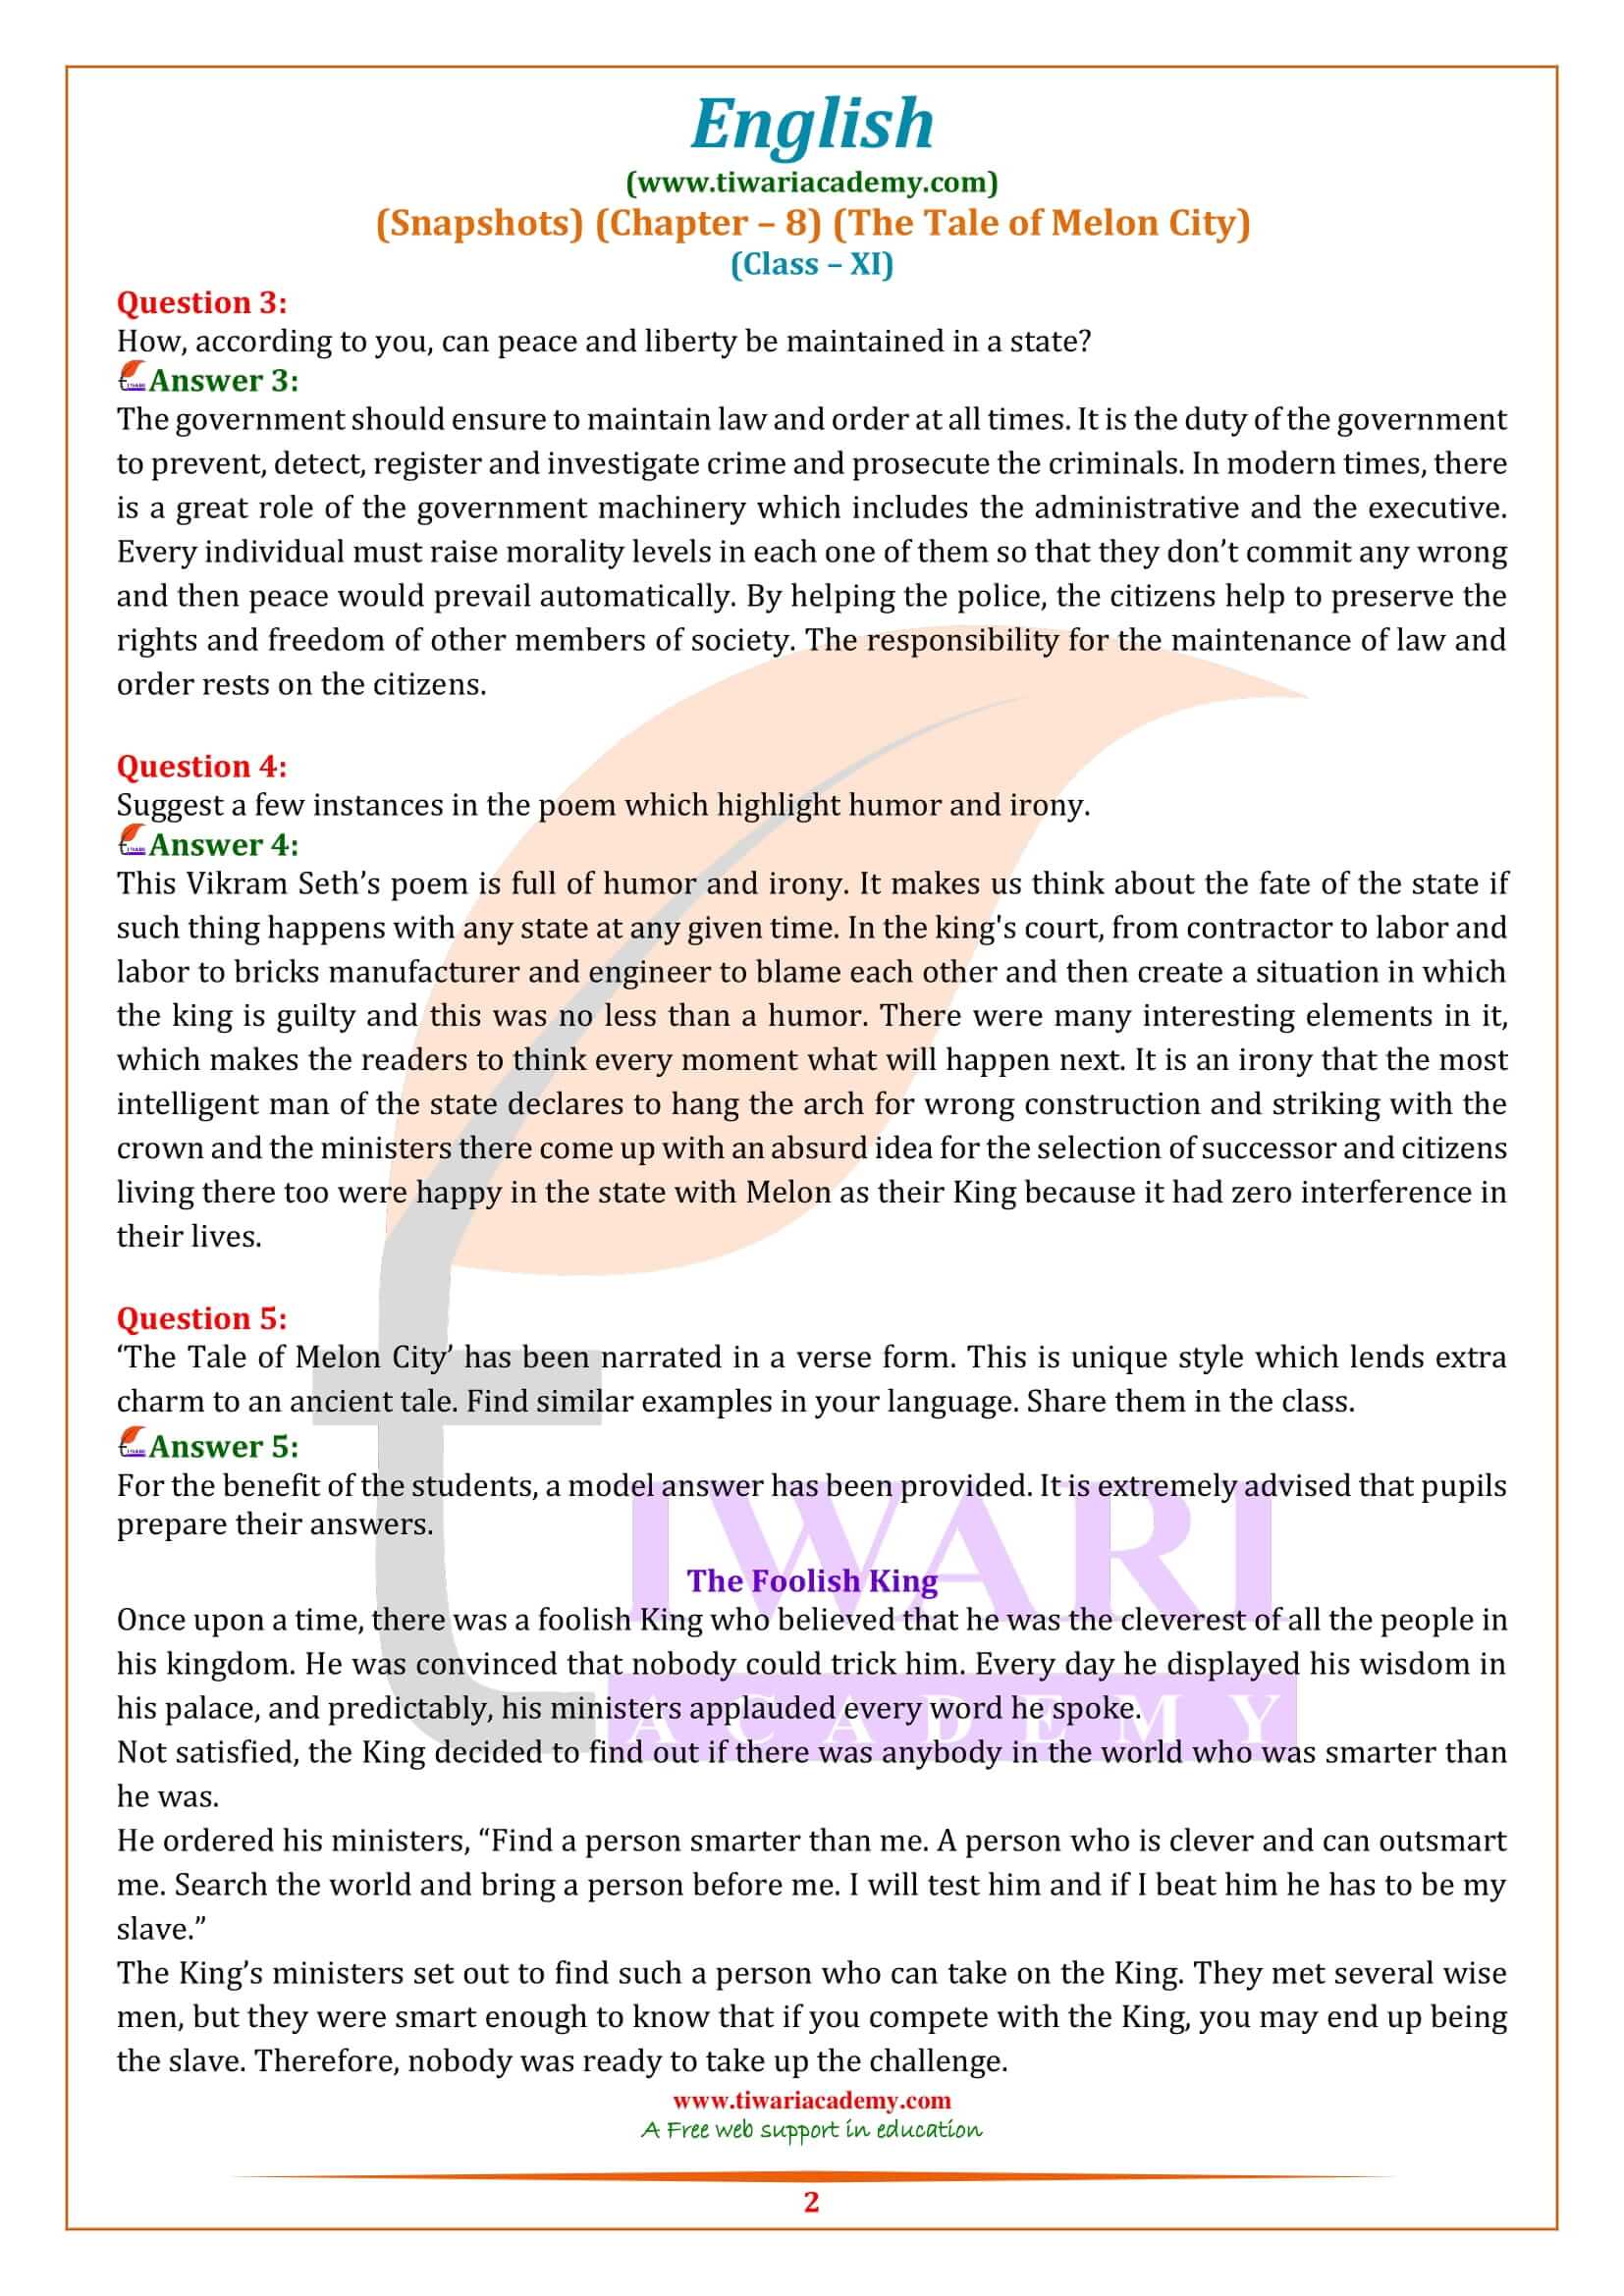 NCERT Solutions for Class 11 English Snapshots Chapter 8 Question Answers